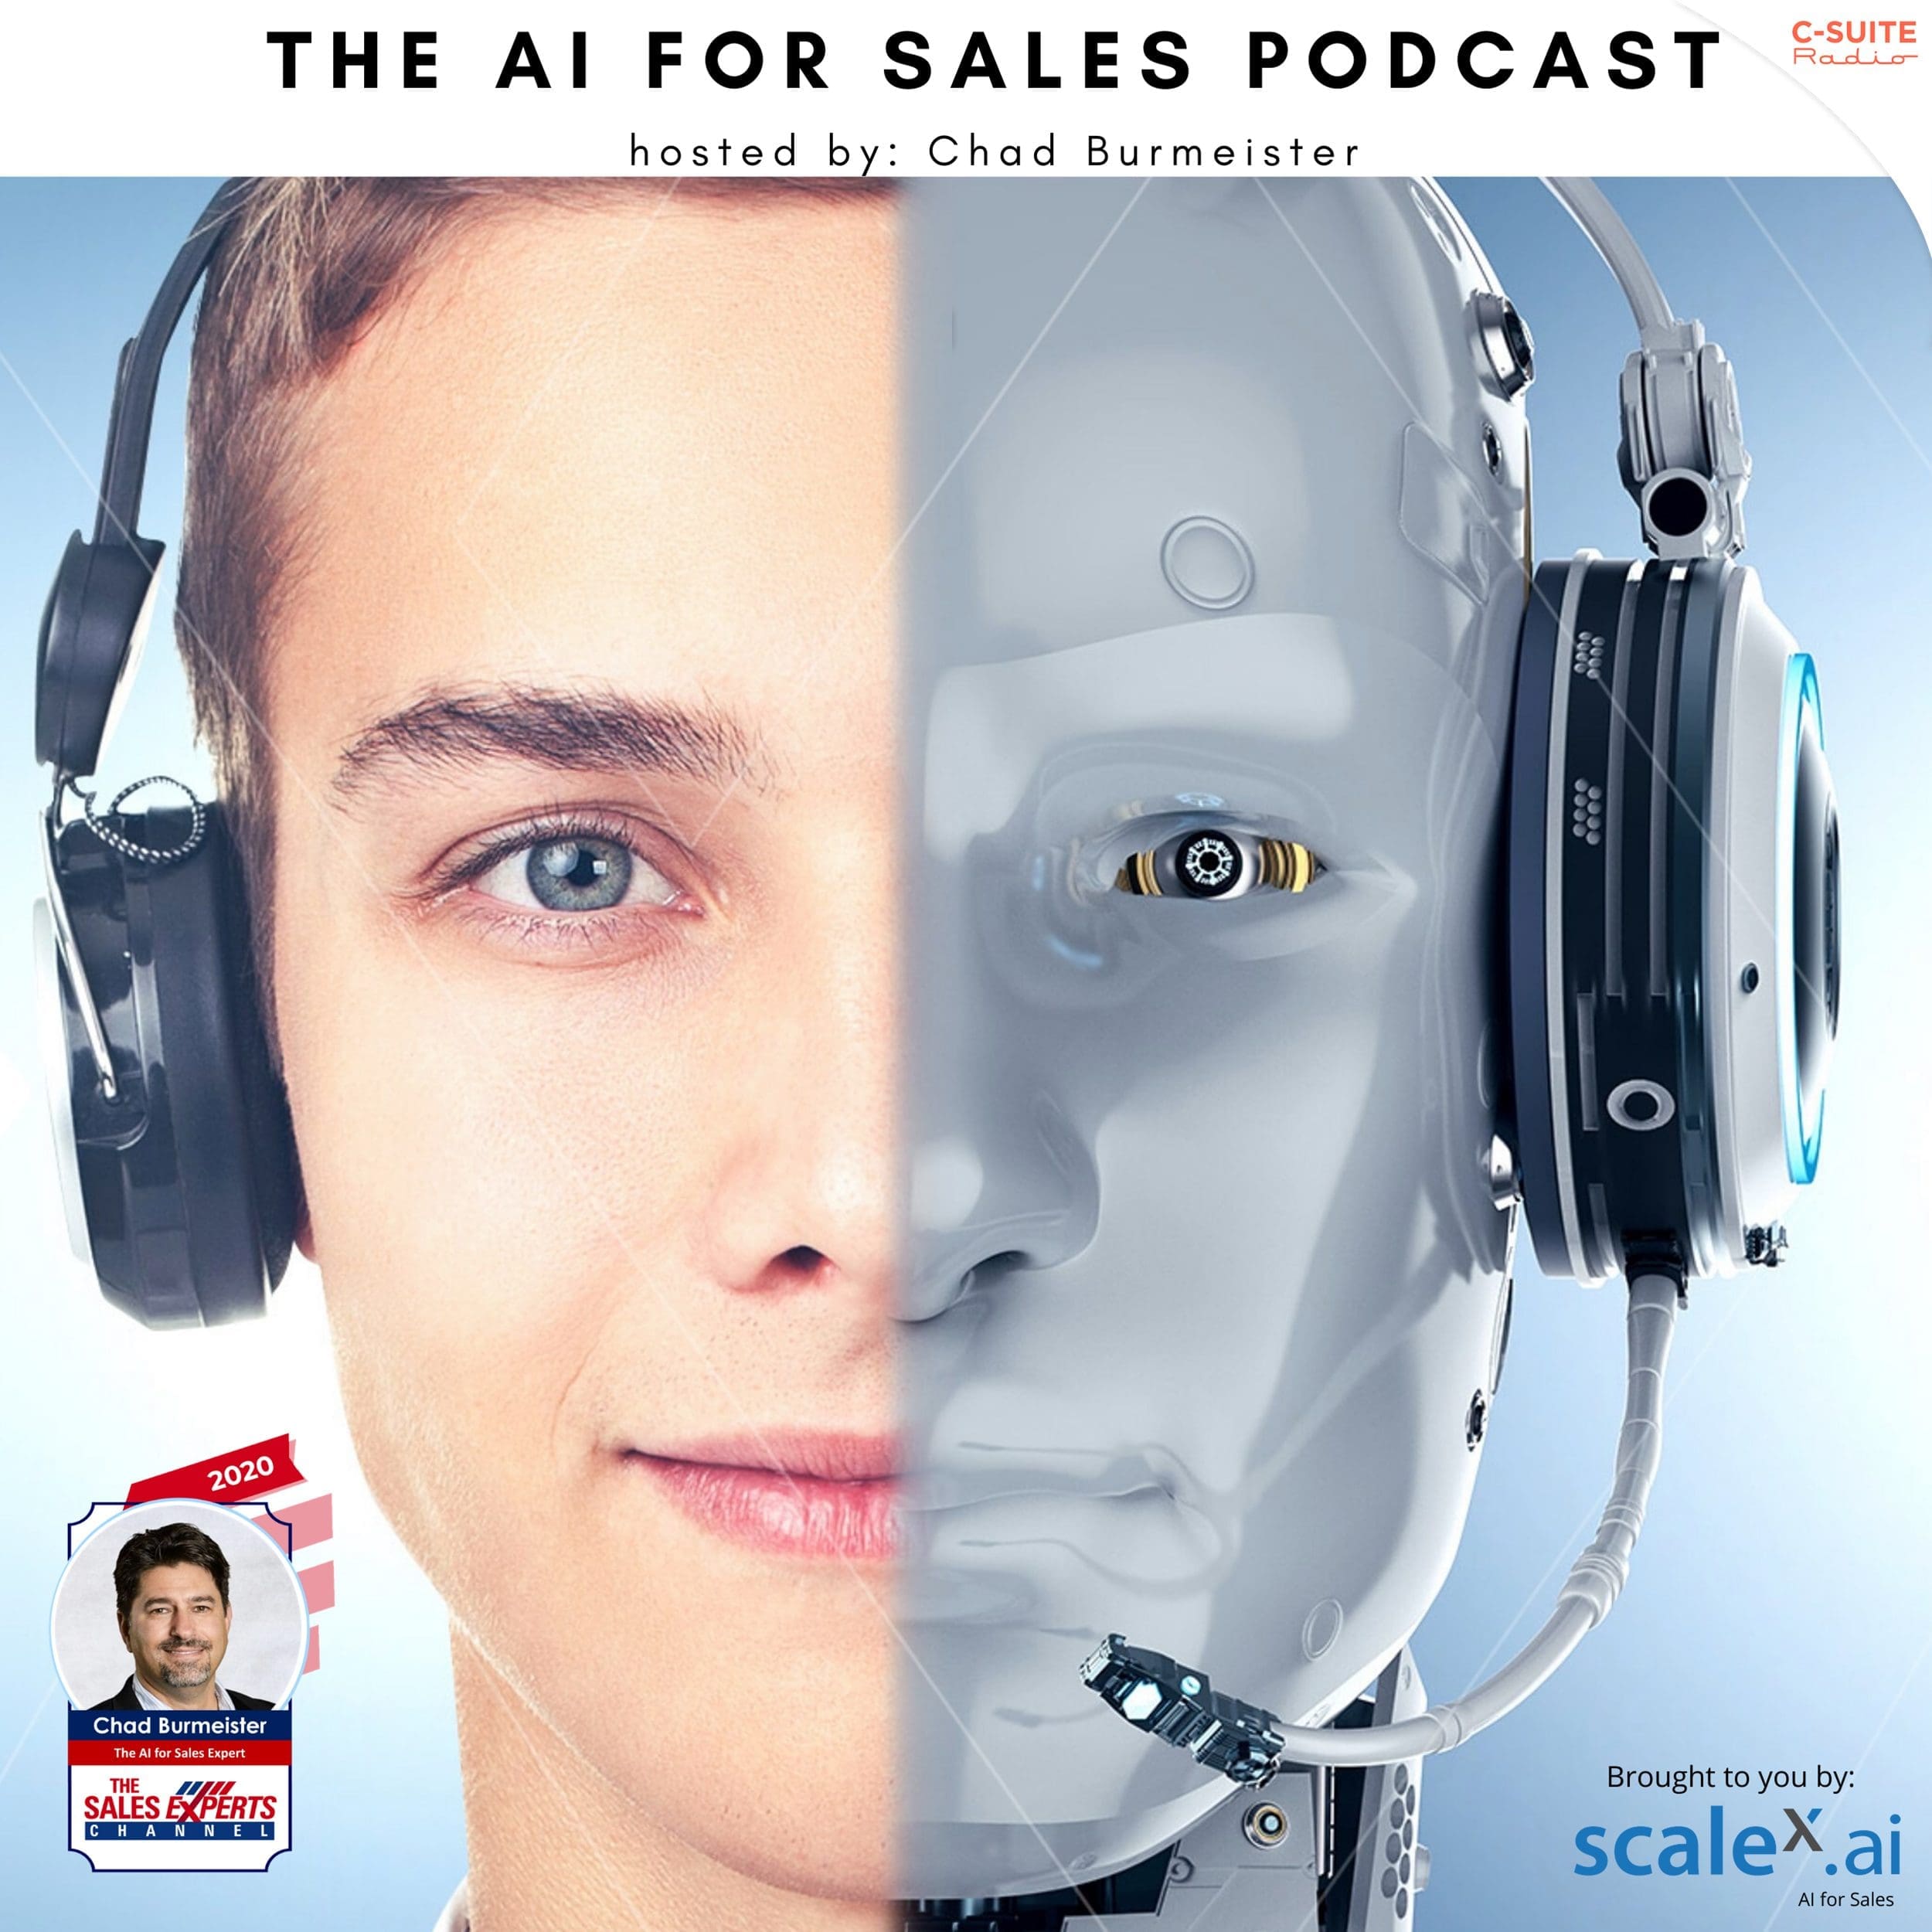 Traq.ai CEO Interviewed on 'The AI for Sales' Podcast